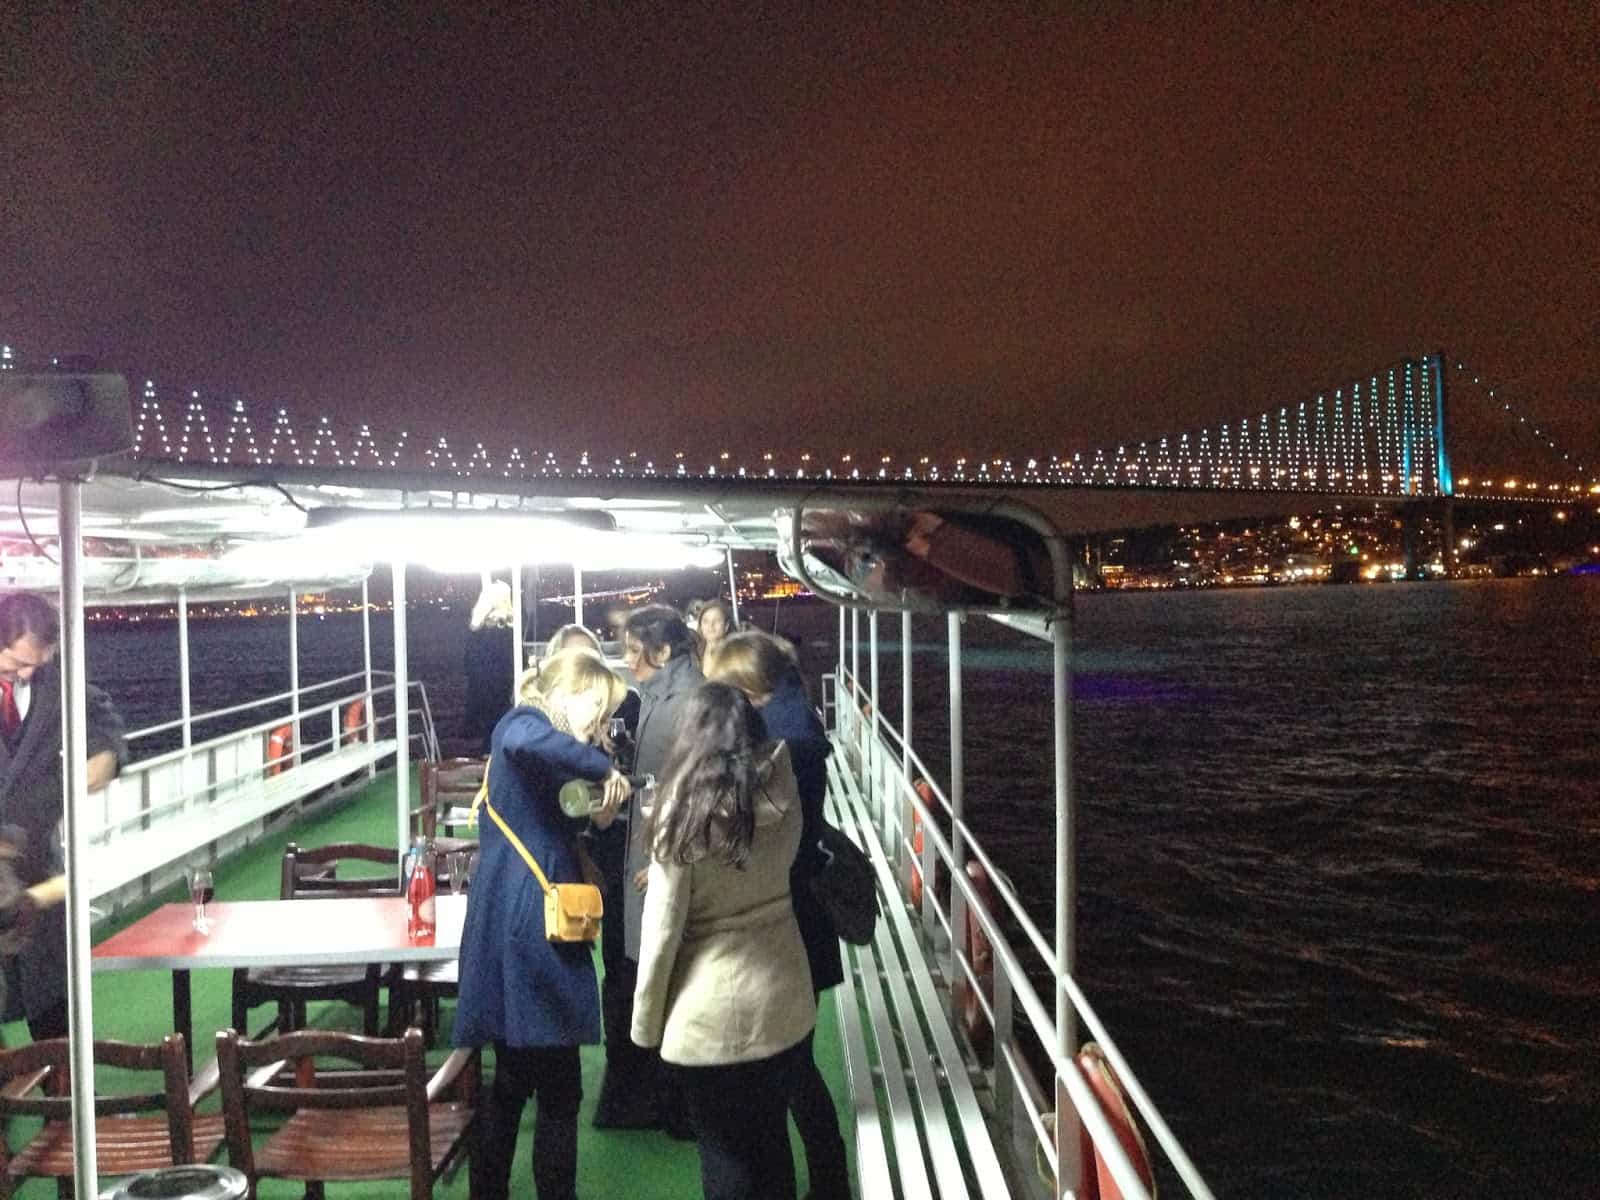 The boat on New Year's Eve in Istanbul, Turkey